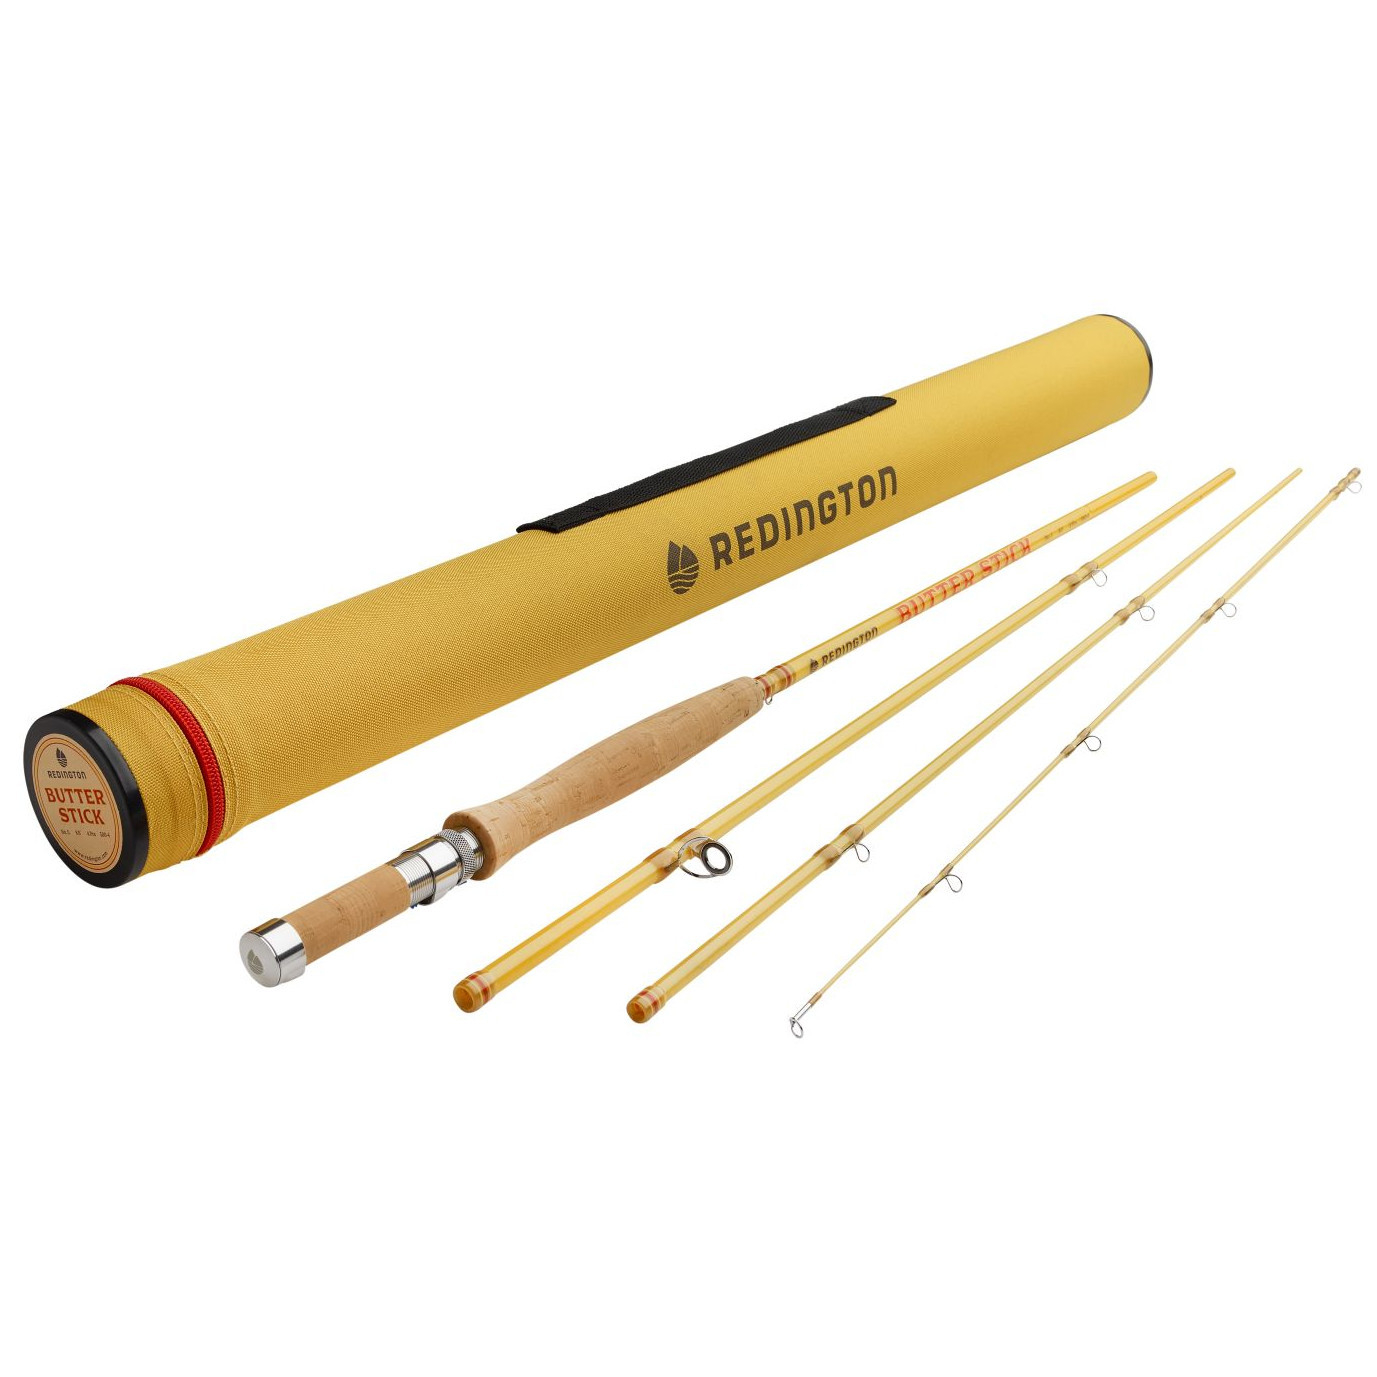 Redington 276-4 Lightweight 4 Piece Classic Trout Angler Small Fly Fishing Rod, Size: 4WT 9'0 inch 4 PC (490-4), Multicolor